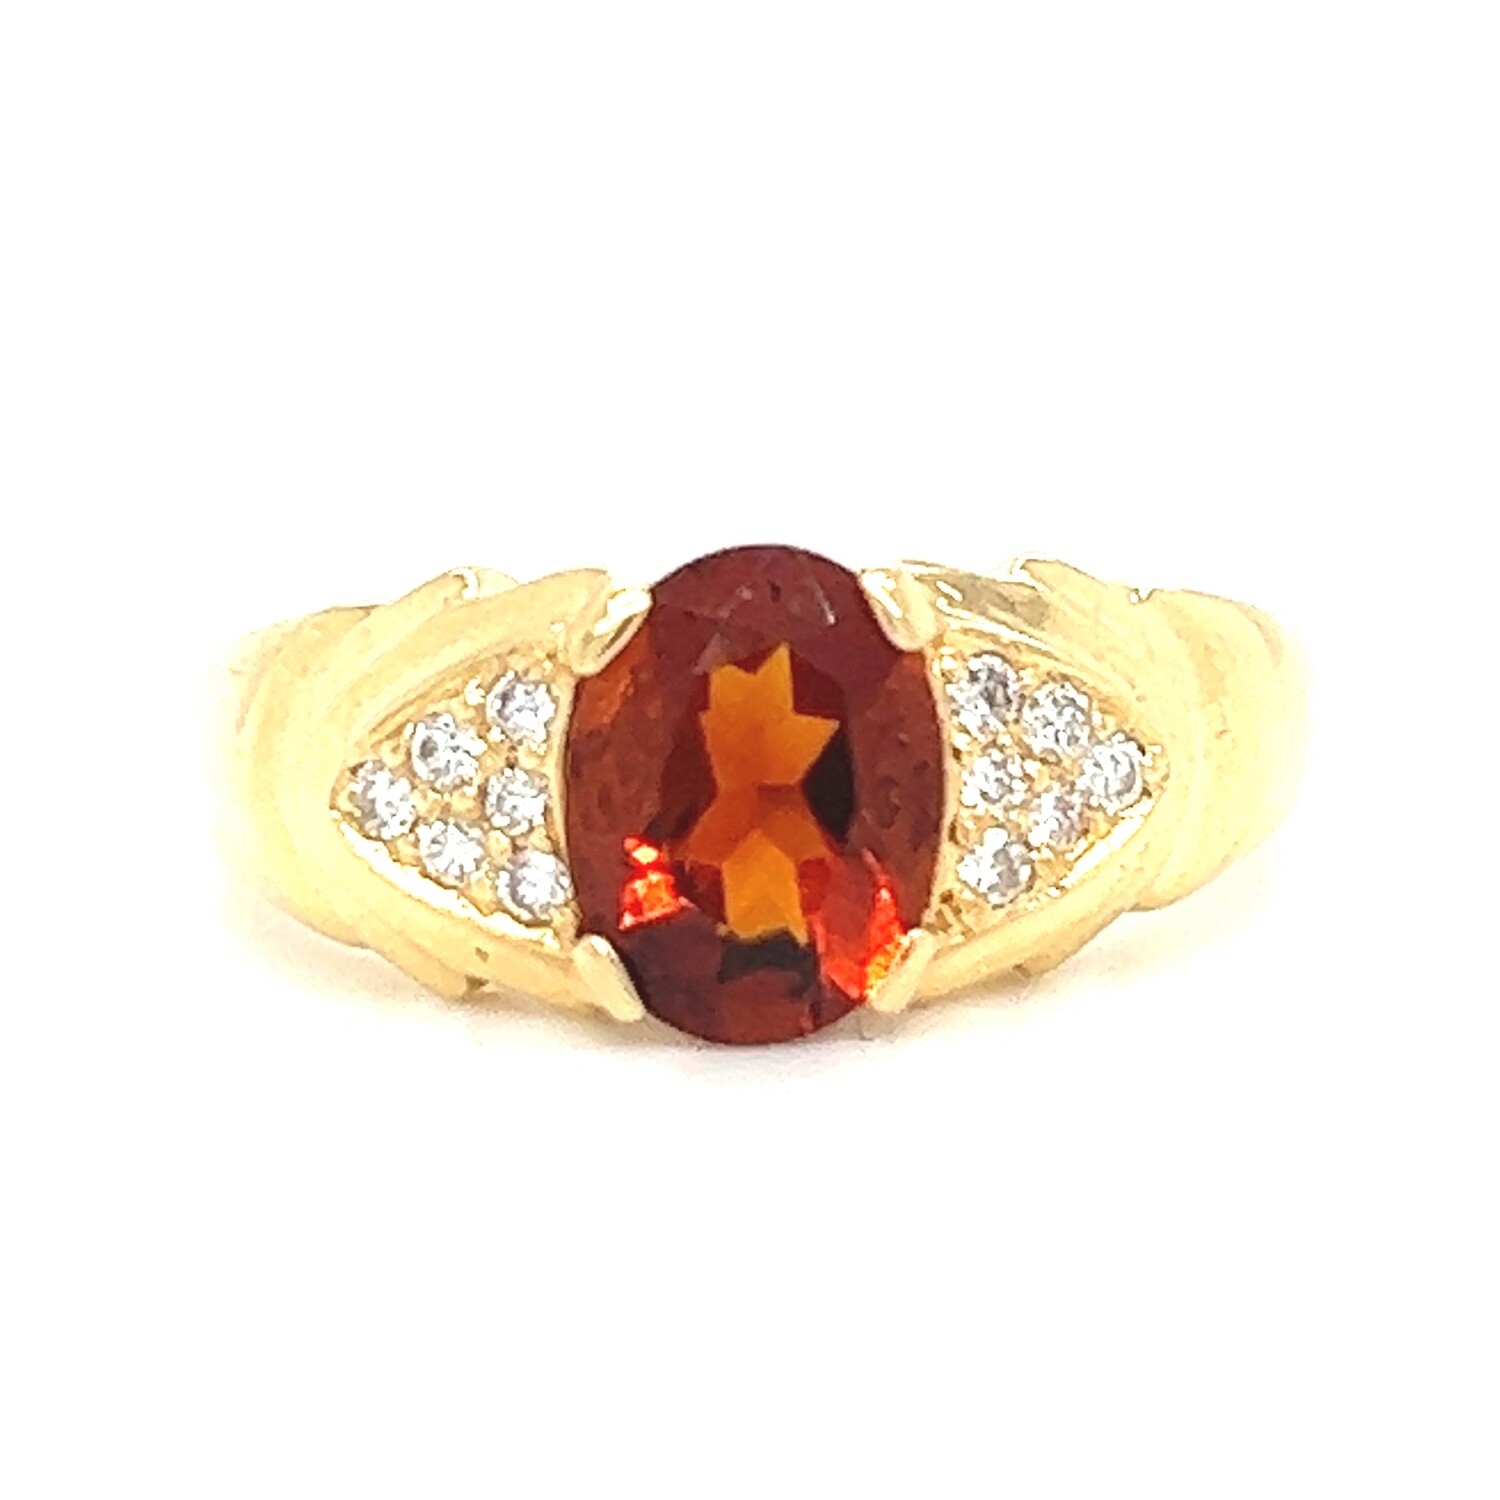 Mozambique Garnet Ring in 18k Yellow Gold